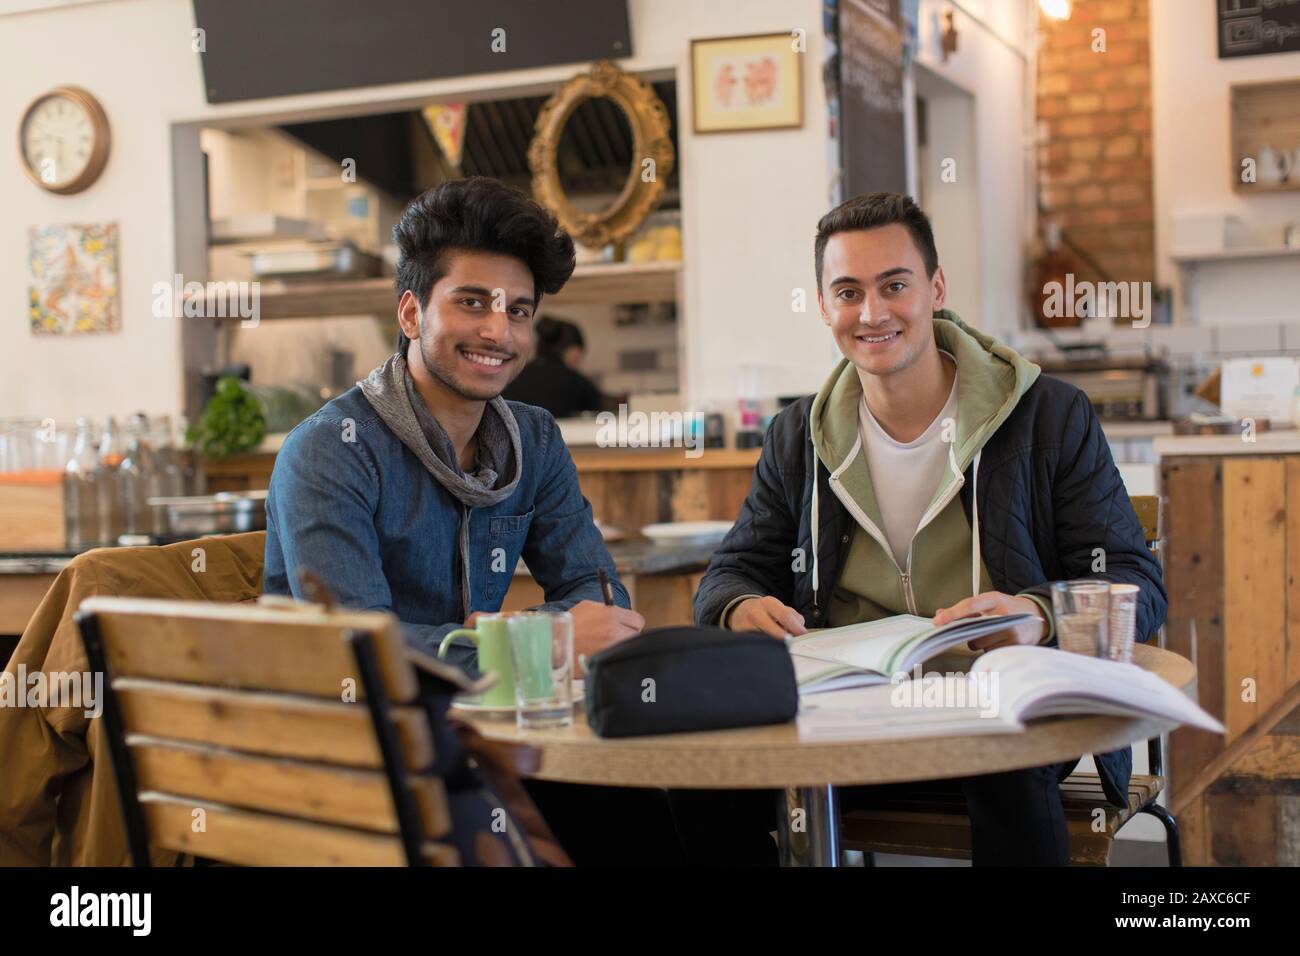 Portrait confident young male college students studying at cafe table Stock Photo